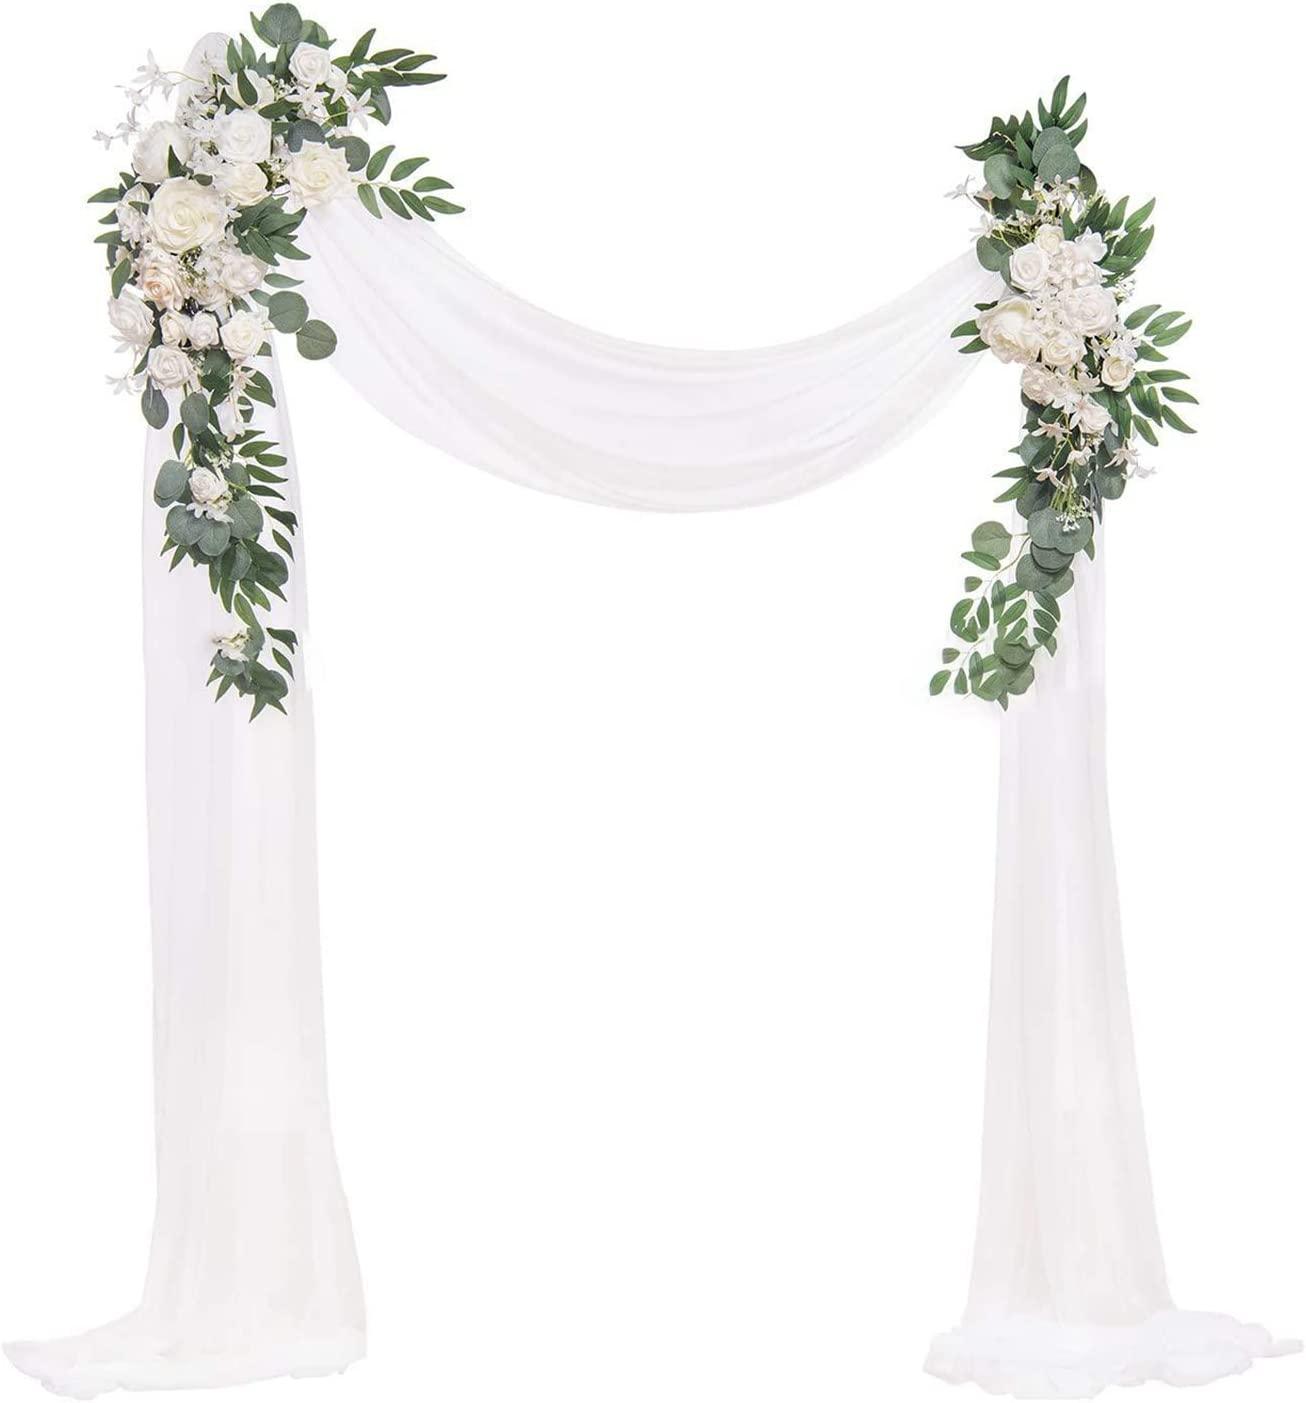 Lookein Artificial Flowers Wedding Arch Decoration Kit (Pack of 3) 2pcs T 